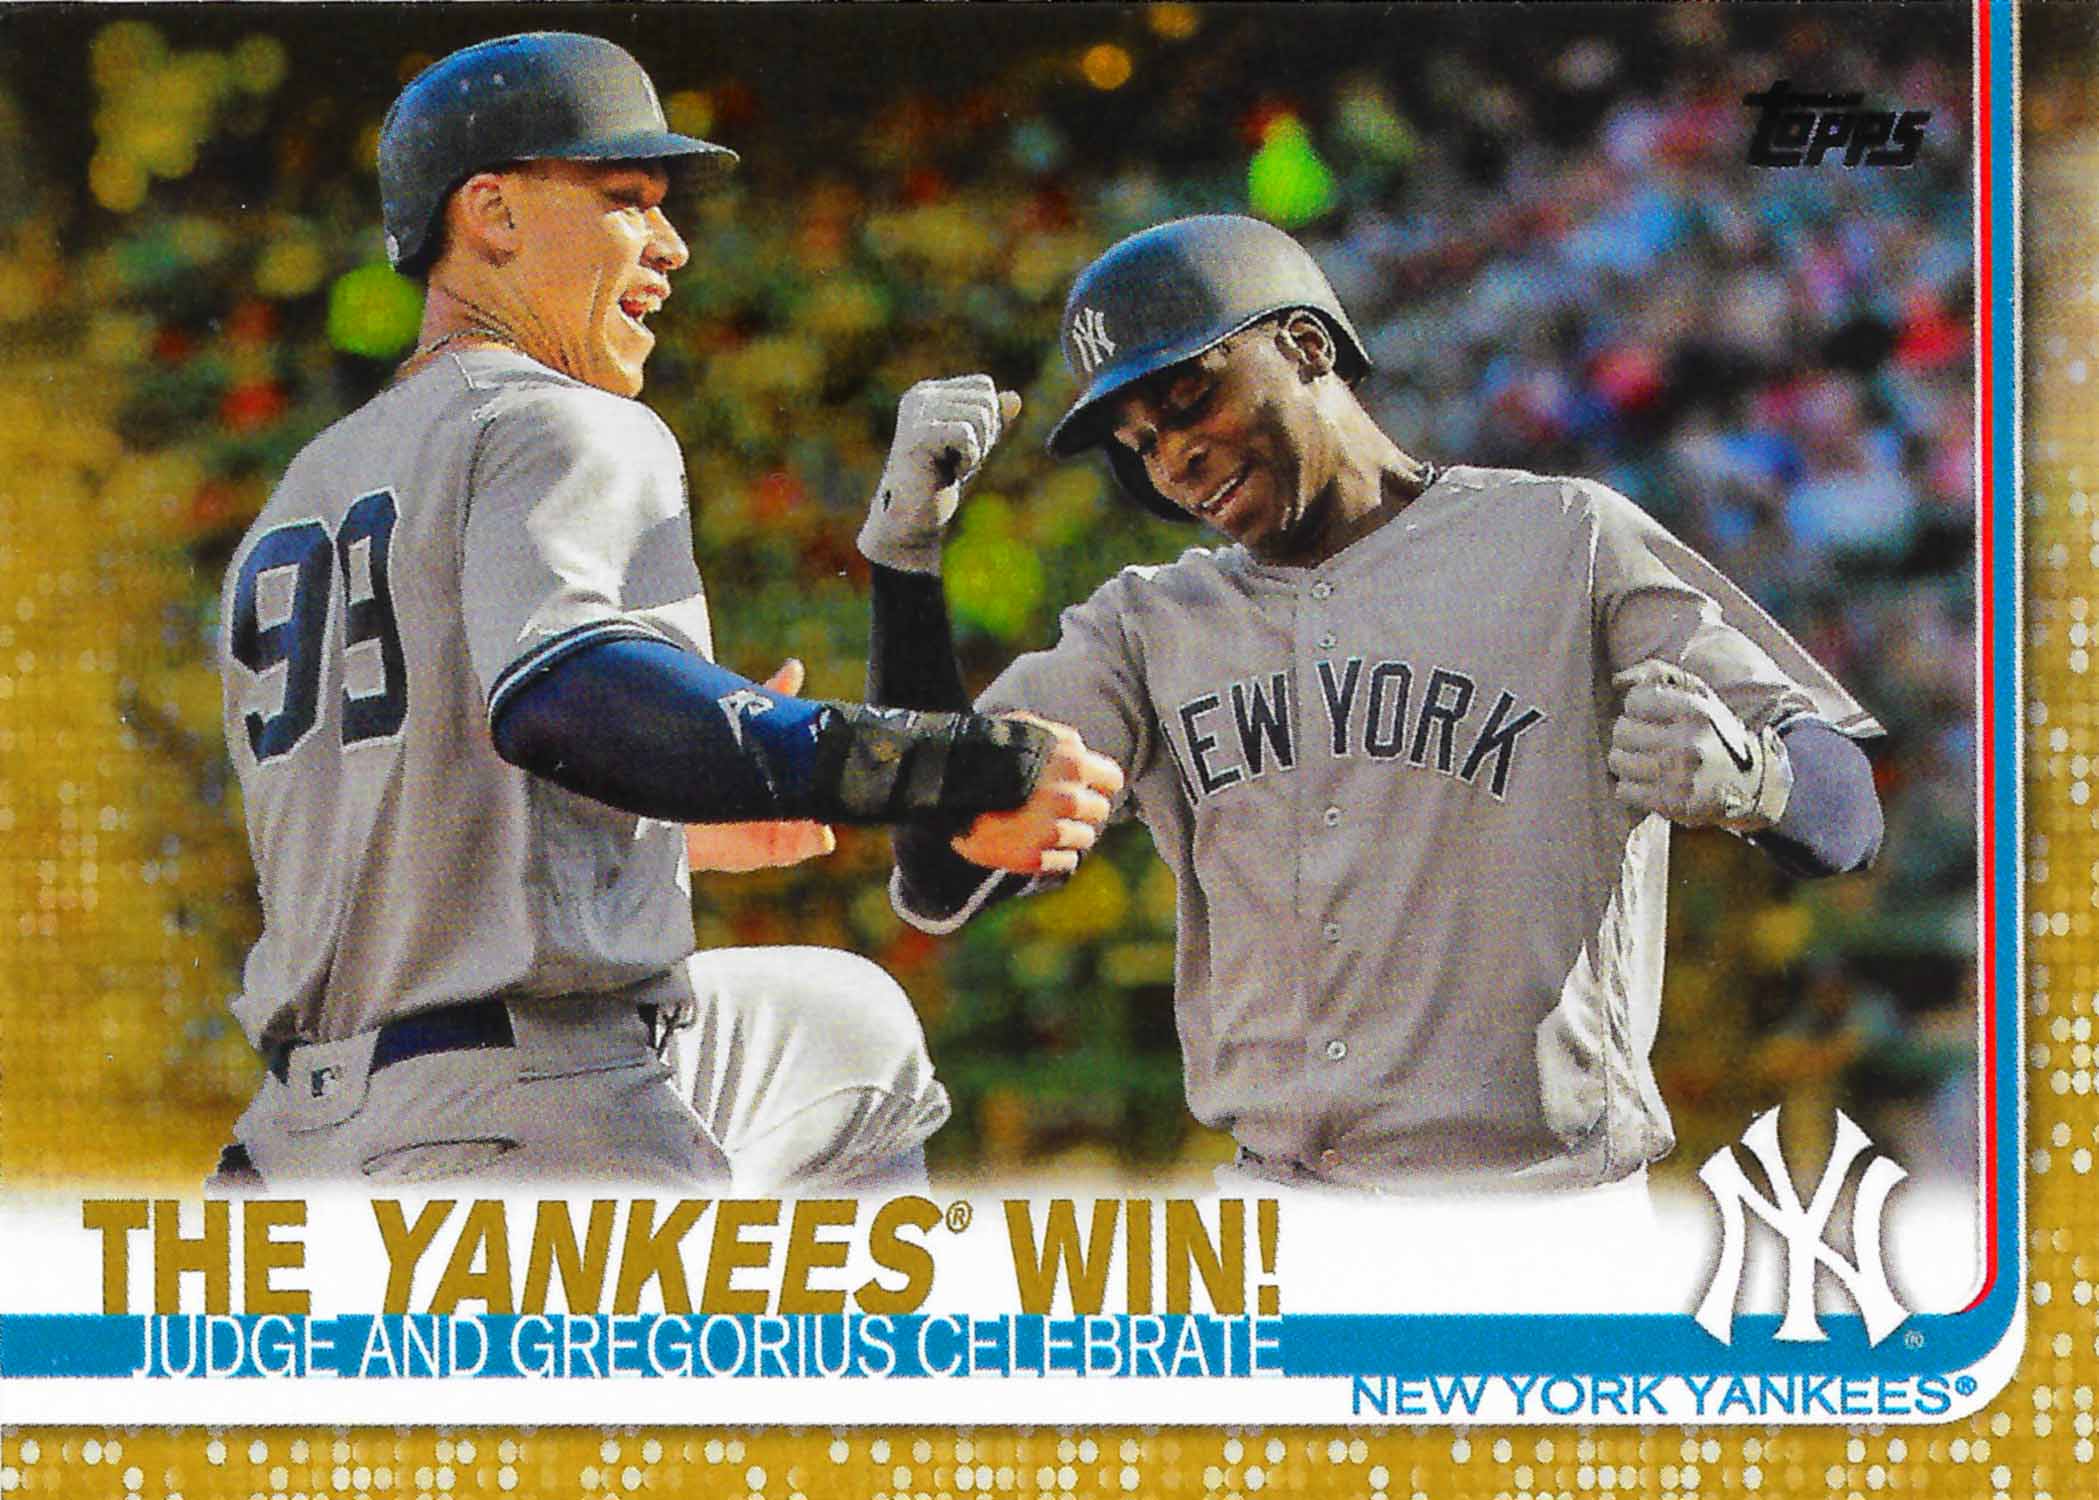 2019 Topps Gold The Yankees Win!